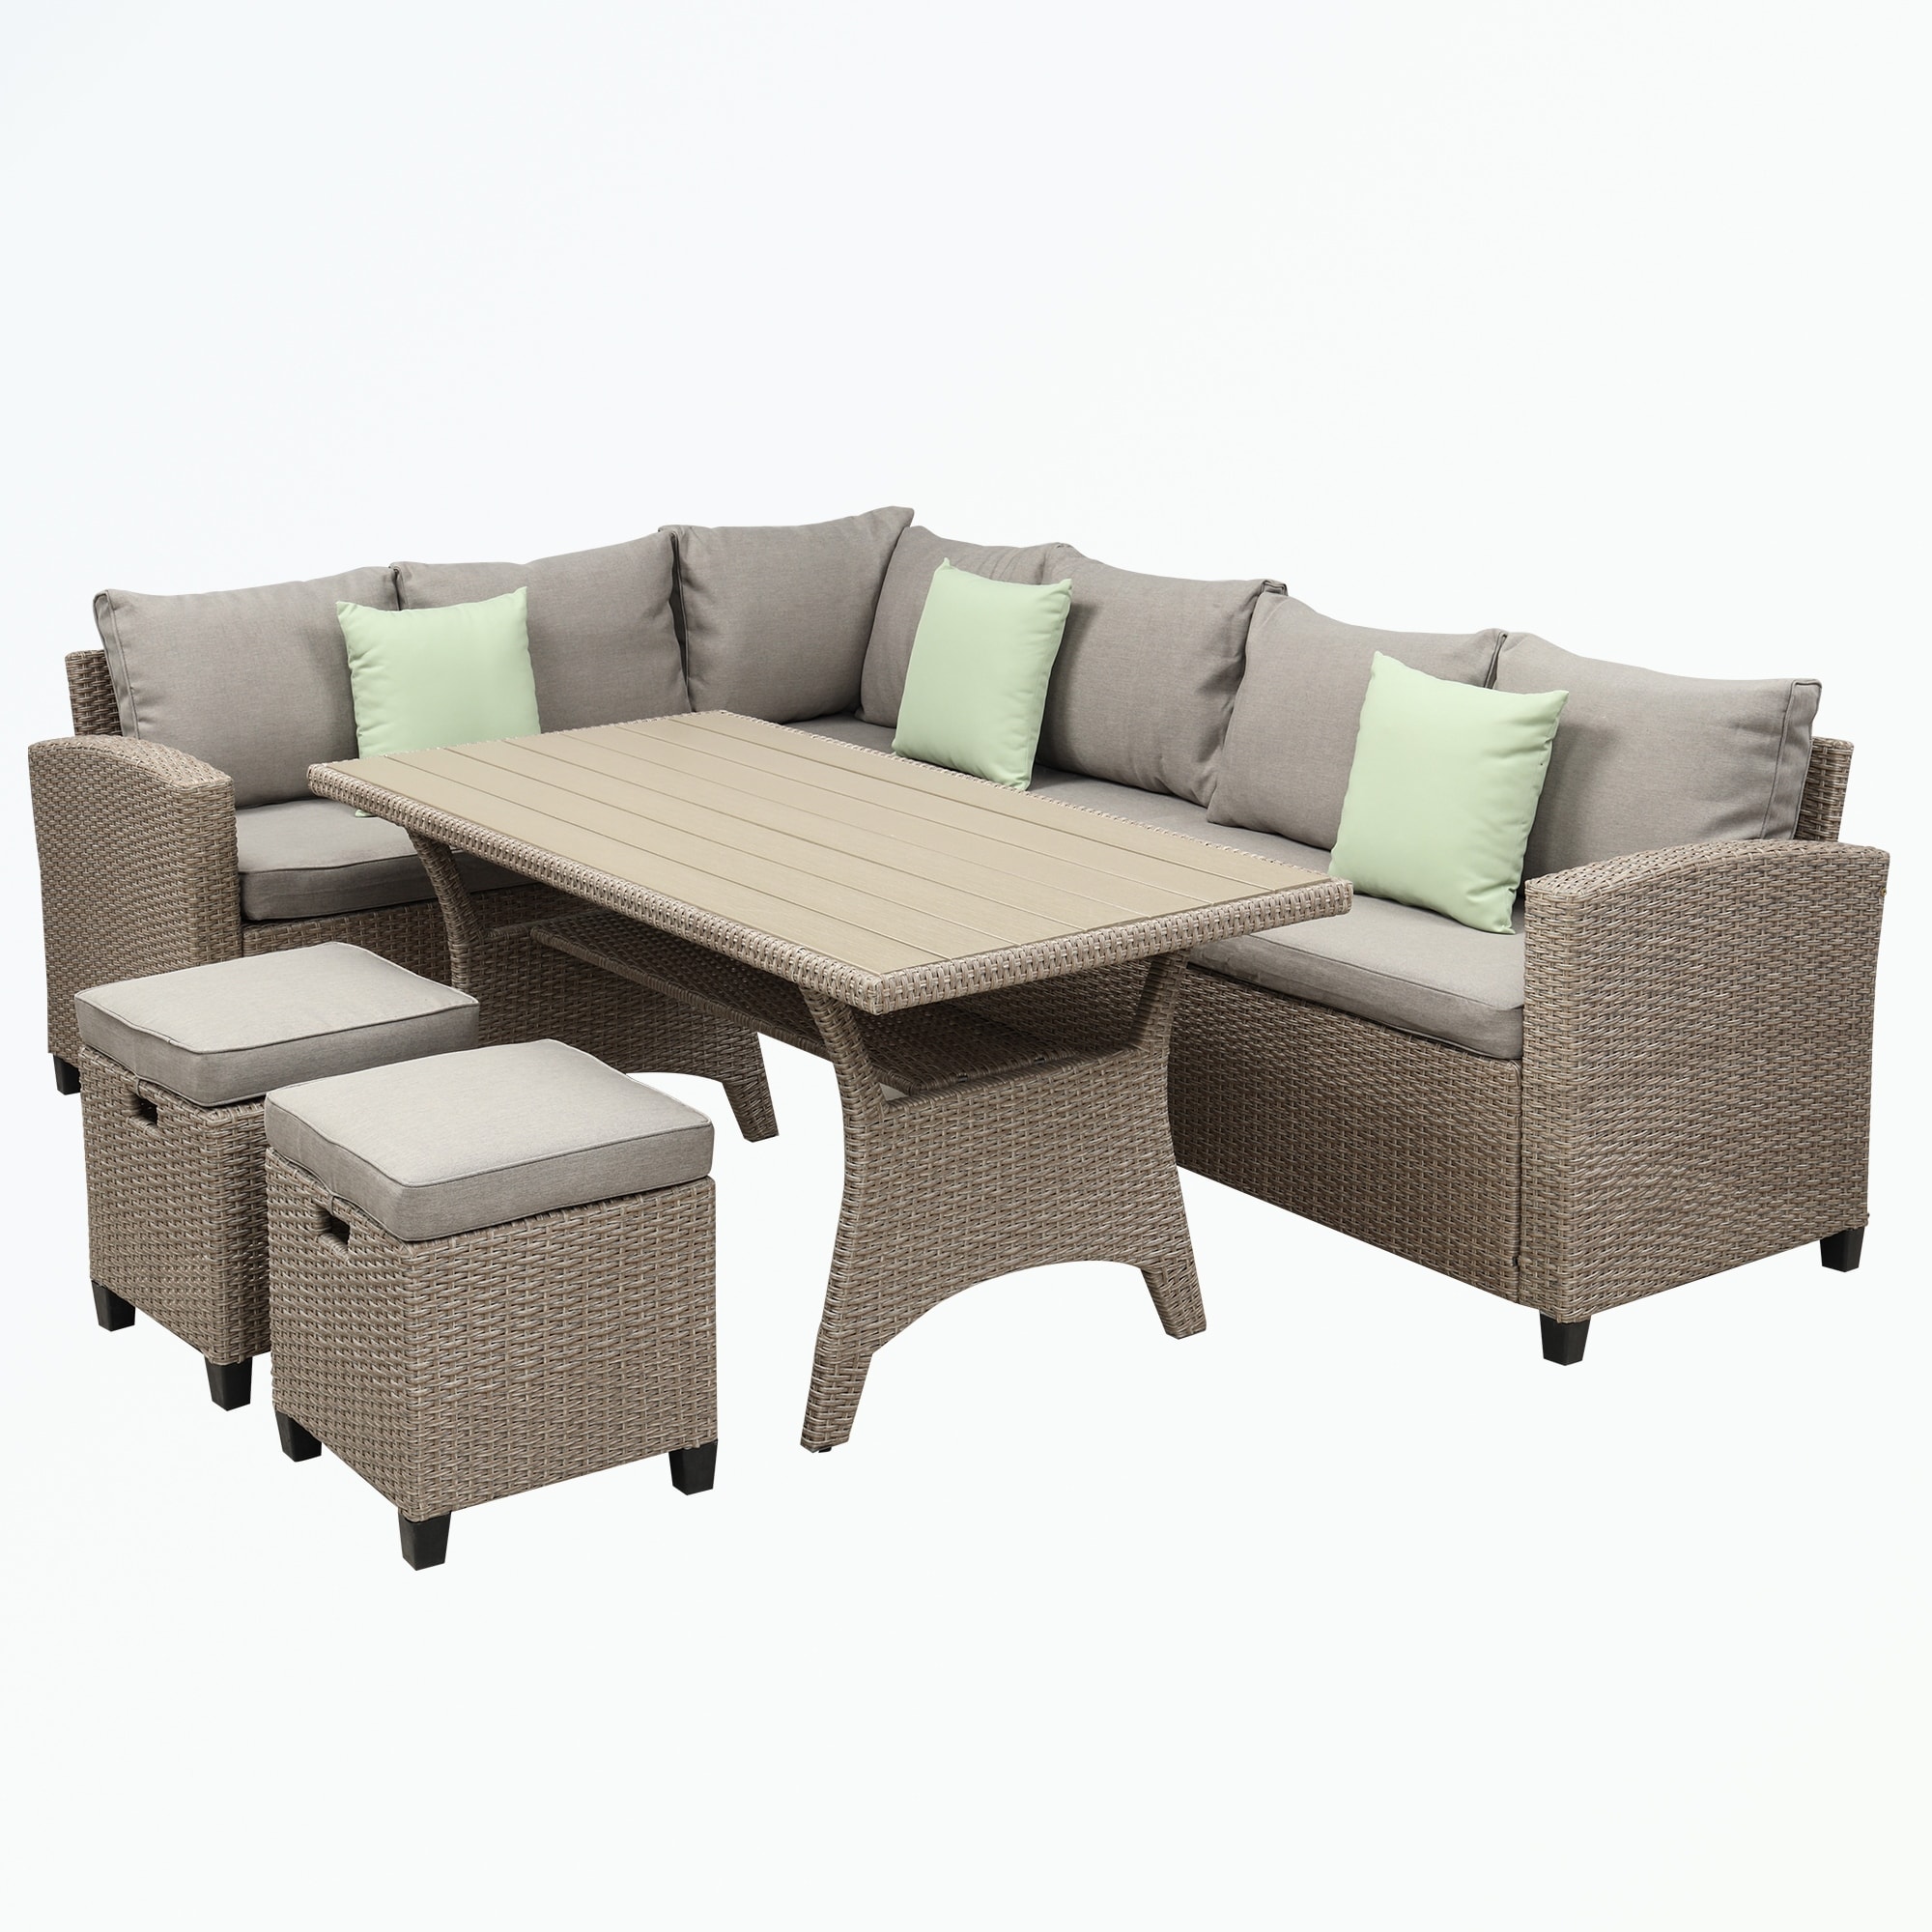 5 Piece Outdoor Conversation Set  Dining Table Chair With Ottoman